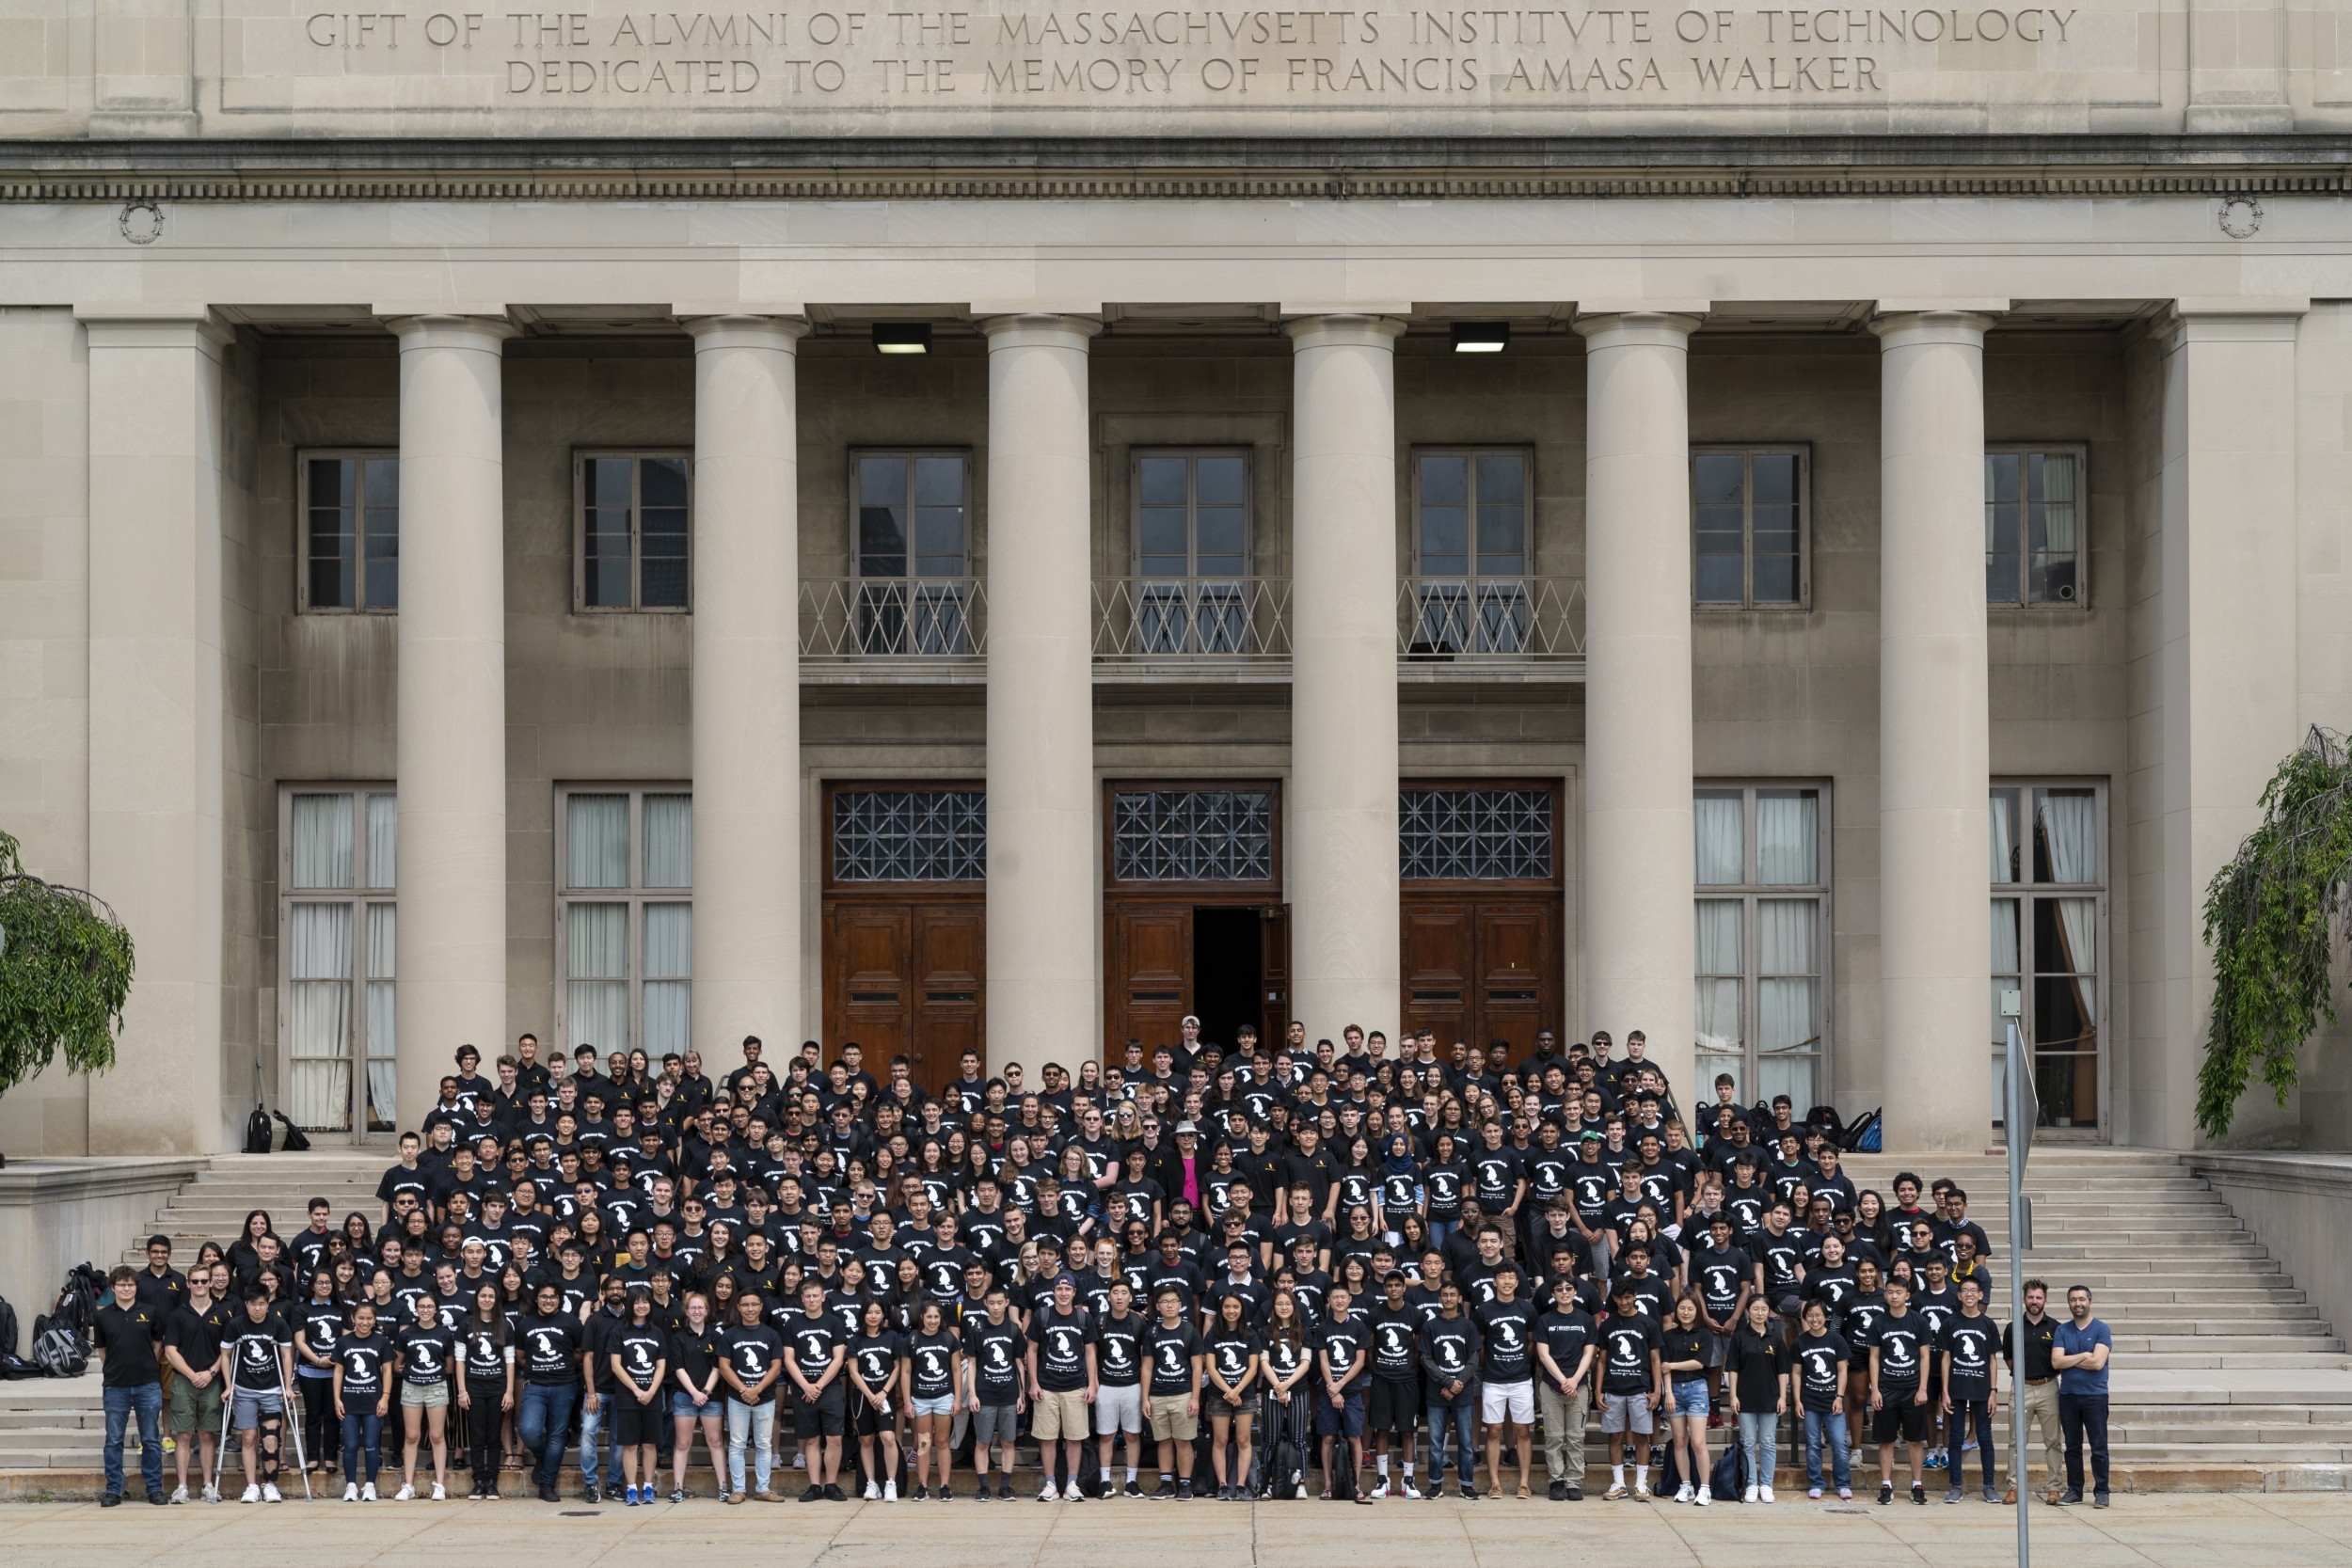 Almost 300 students are participating in the 2019 Beaver Works Summer Institute at MIT. Photo: Glen Cooper.